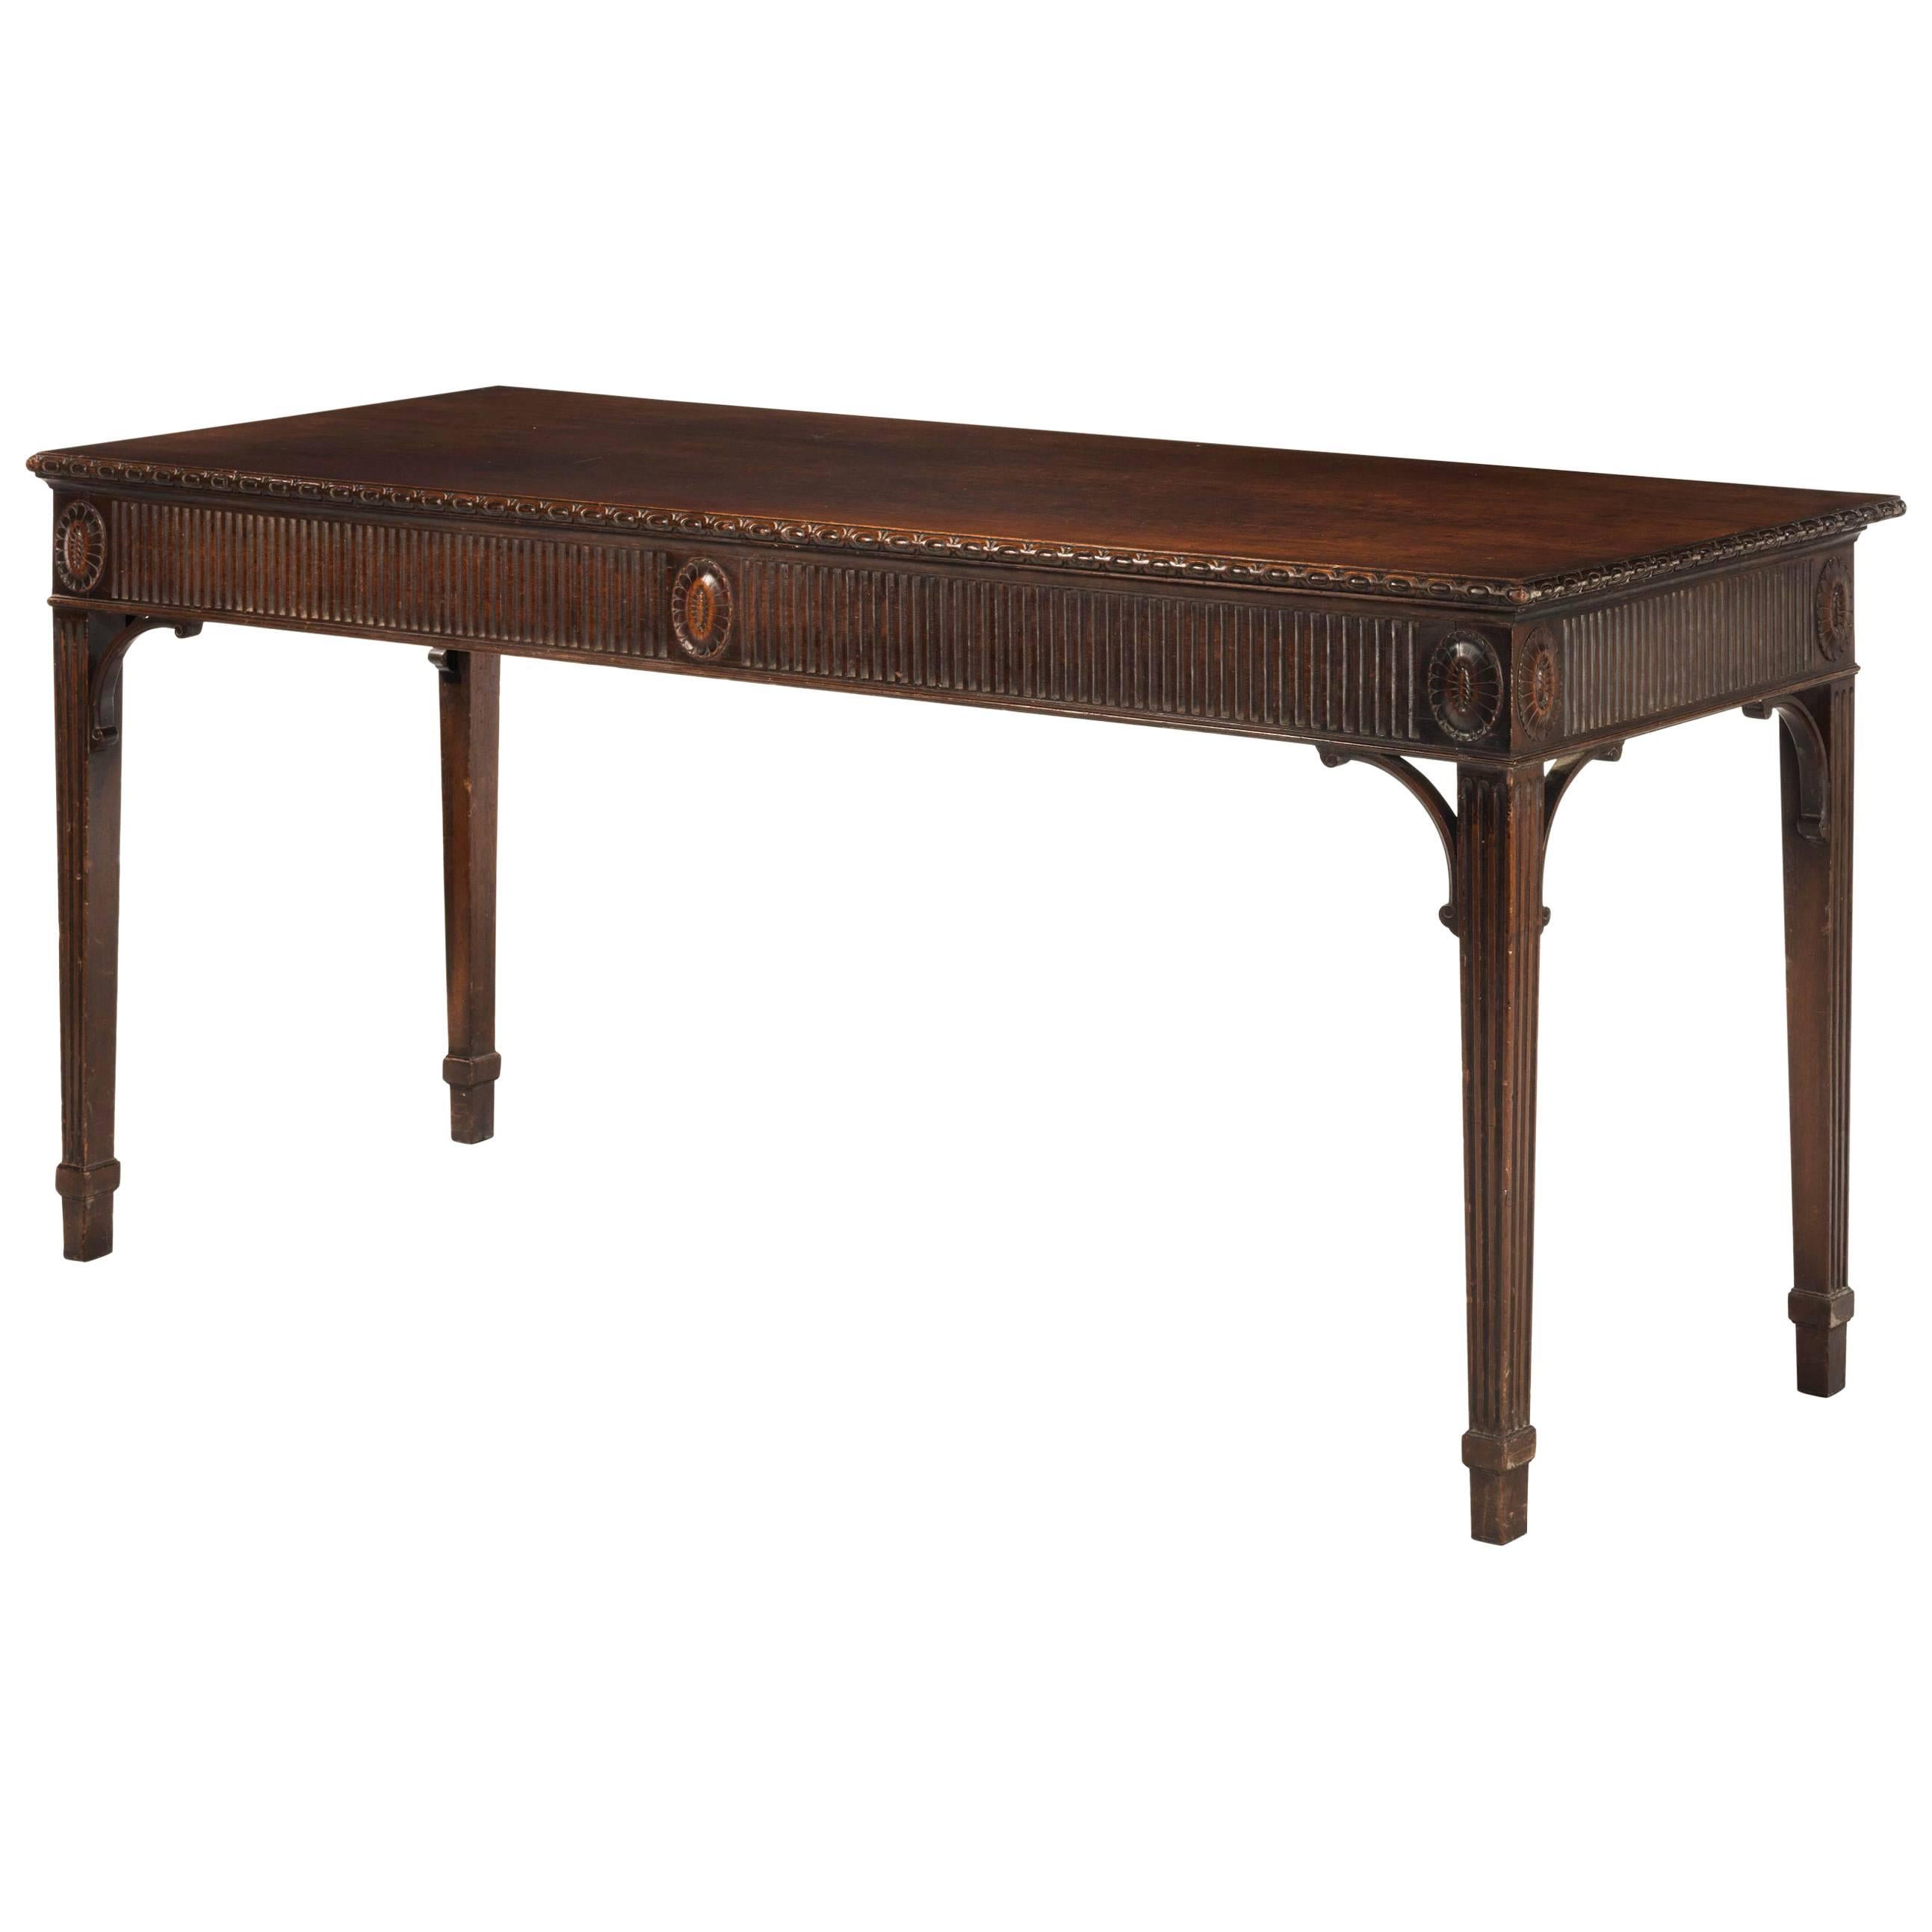 George III Period Mahogany Serving Table